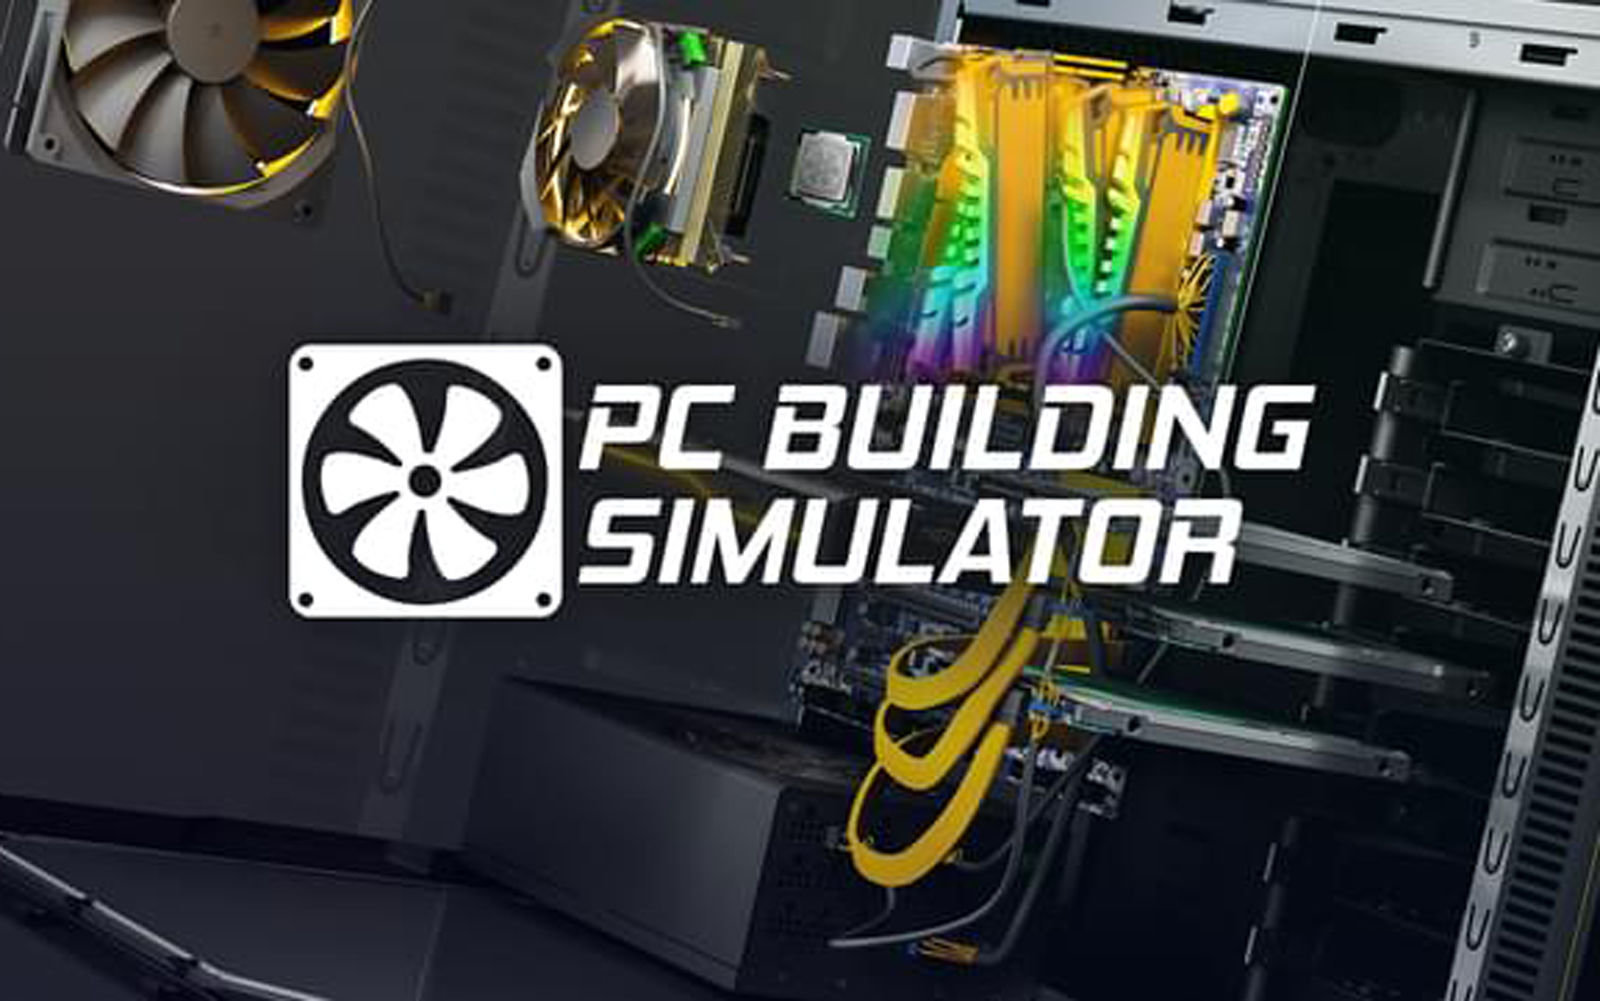 PC Building Simulator Is Now Availiable On Nintendo Switch, Xbox One, And PlayStation 4, You Can Now Build A Digital Gaming PC On Console